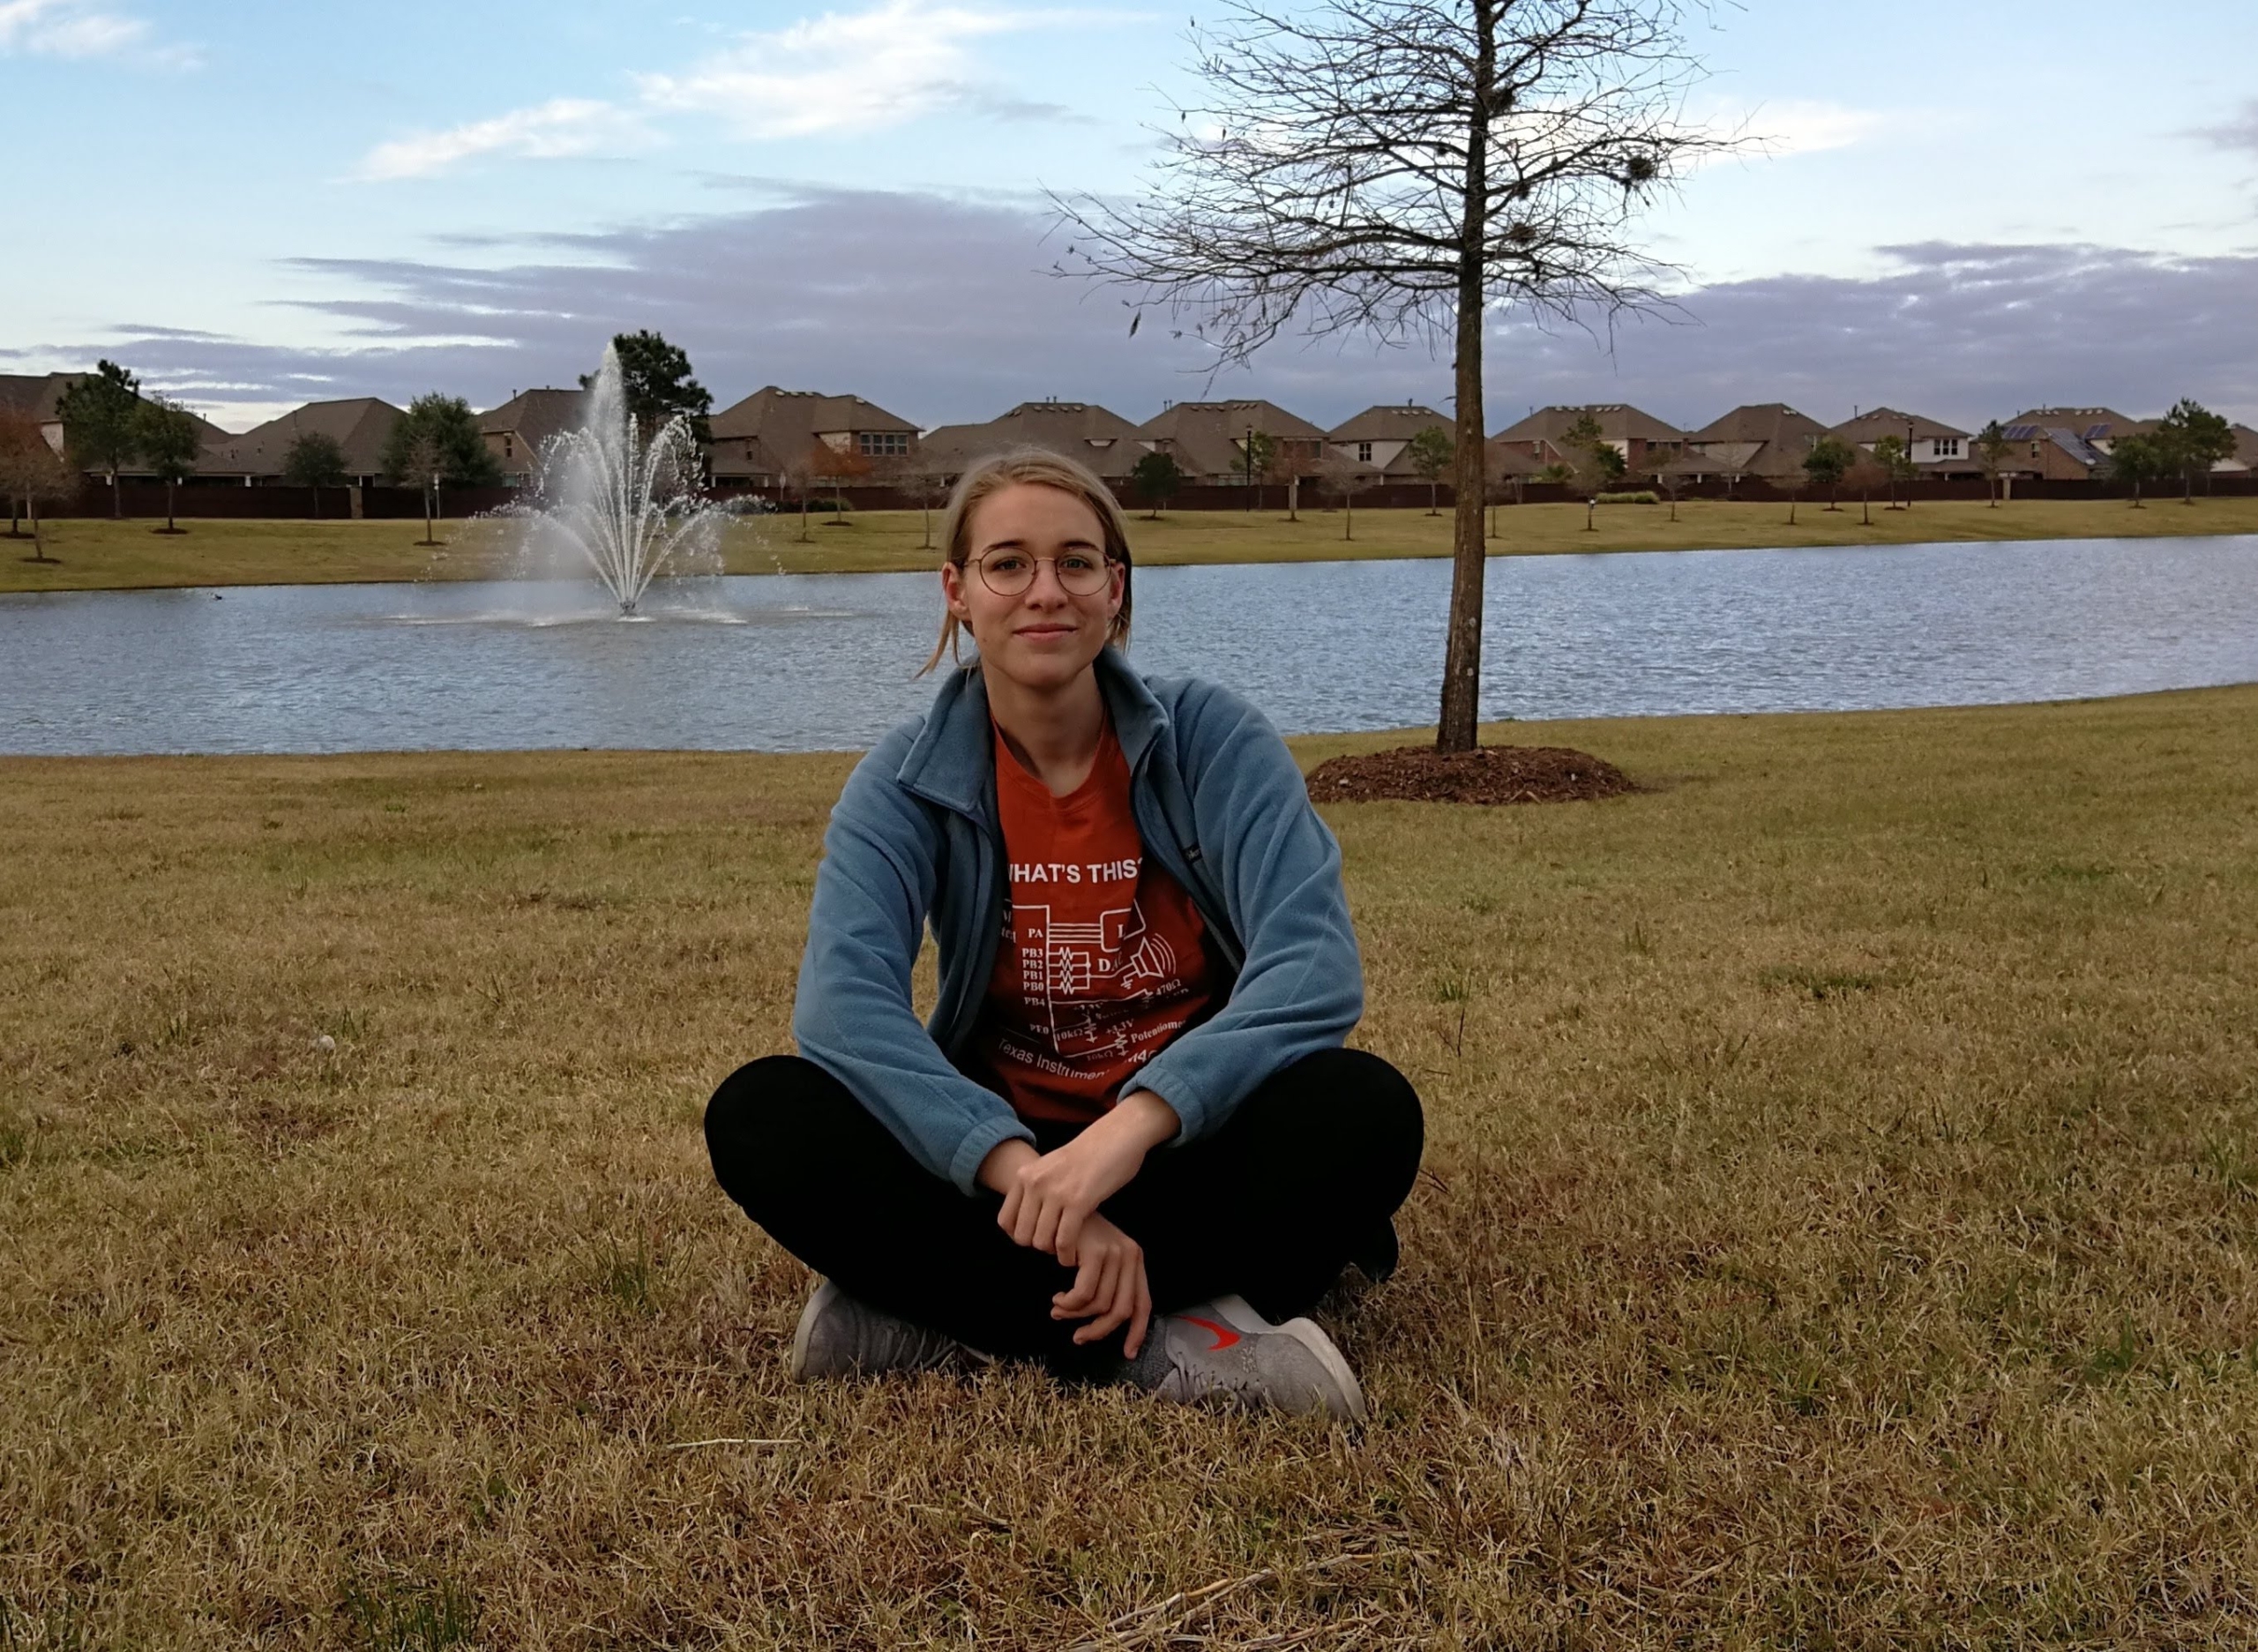 Profile image of Vivian Rogers, sitting on grass in front of a lake/fountain, full body.